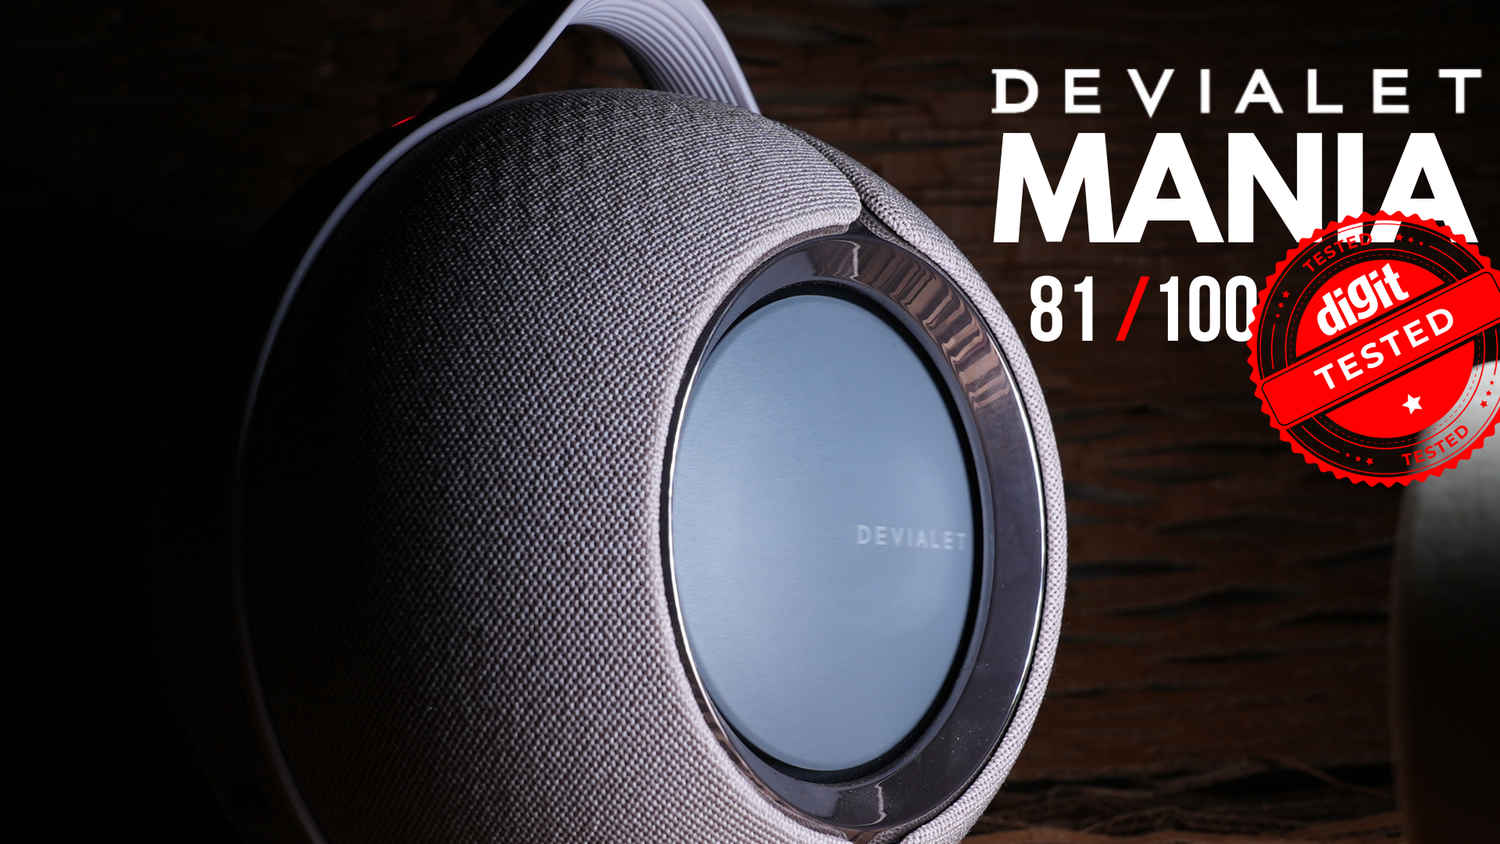 Devialet Mania Review – Pricey speaker that delivers on its promises